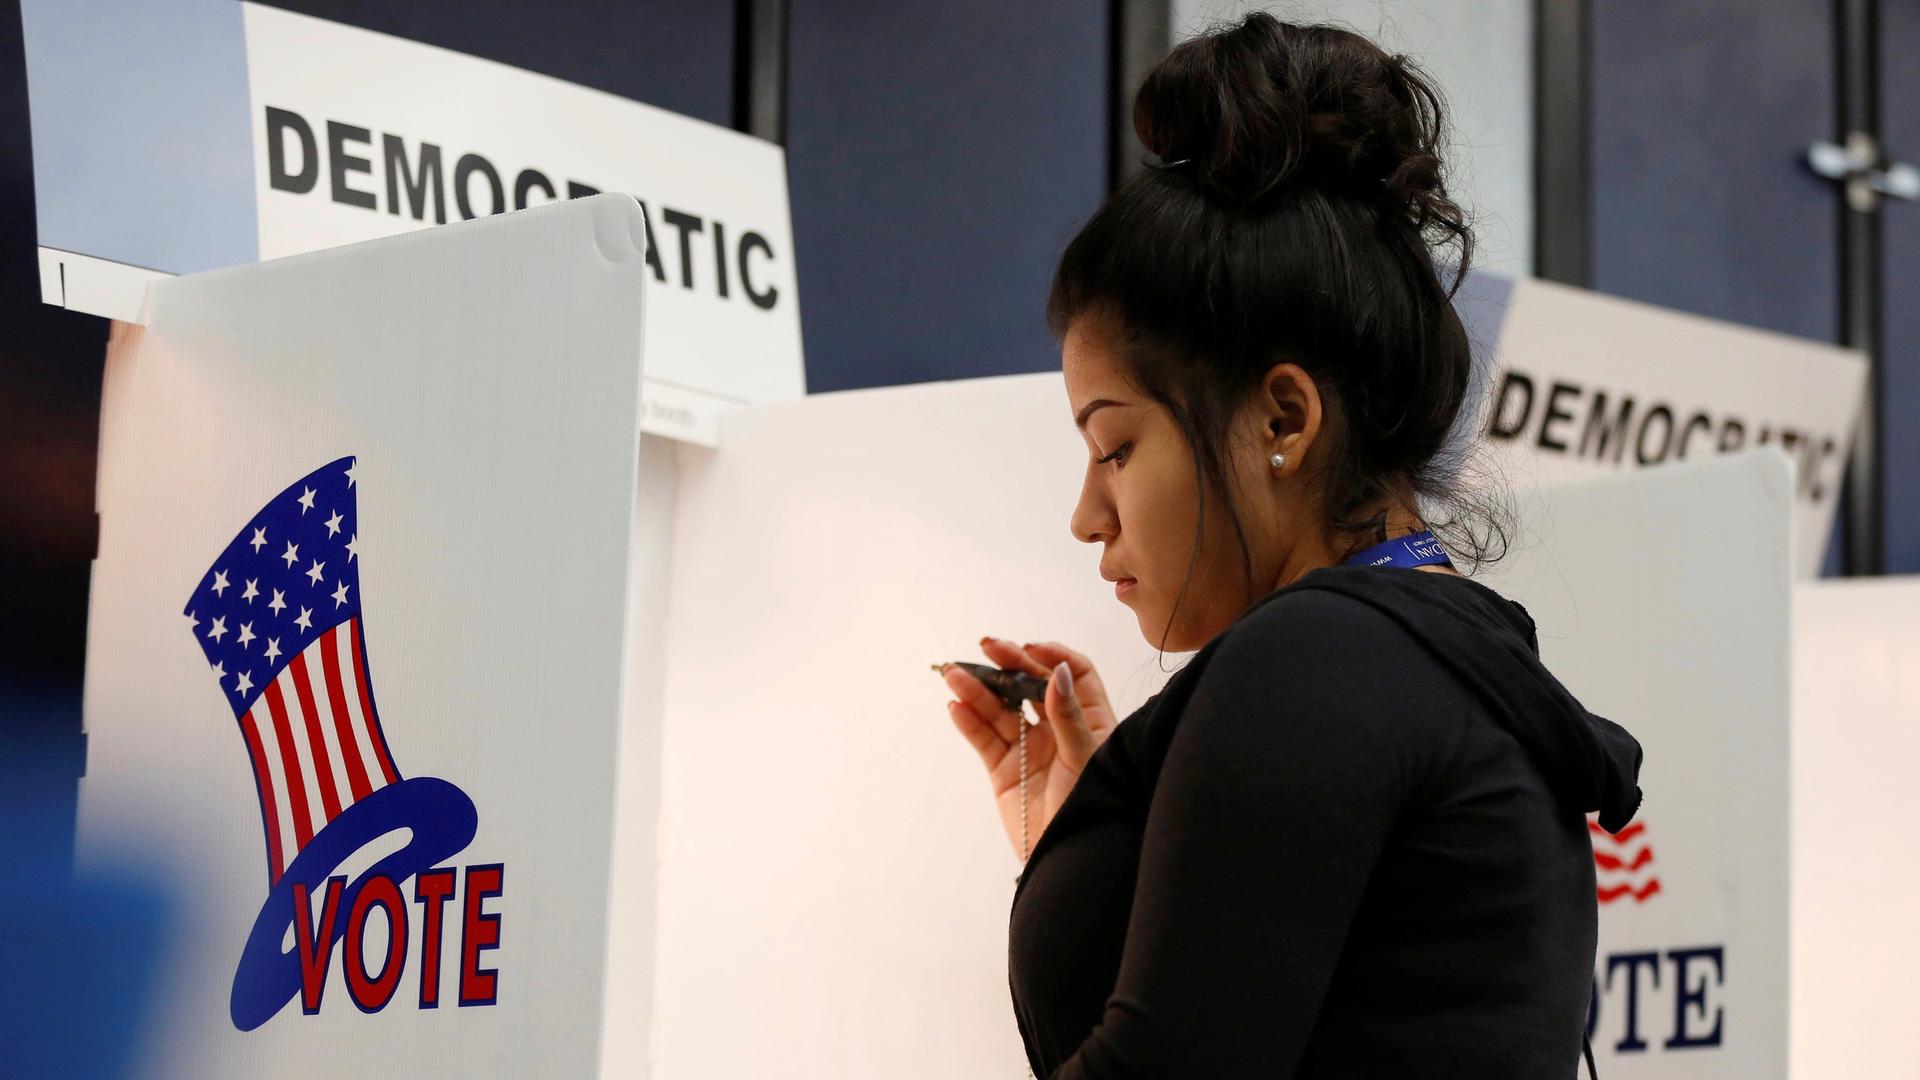 Kimberly Medina, 19, votes during the U.S. presidential primary election at Gates Street Elementary School in Los Angeles, California, on  June 7, 2016. Californians will vote Nov. 8 on a ballot measure that seeks to overturn a ban on bilingual education.